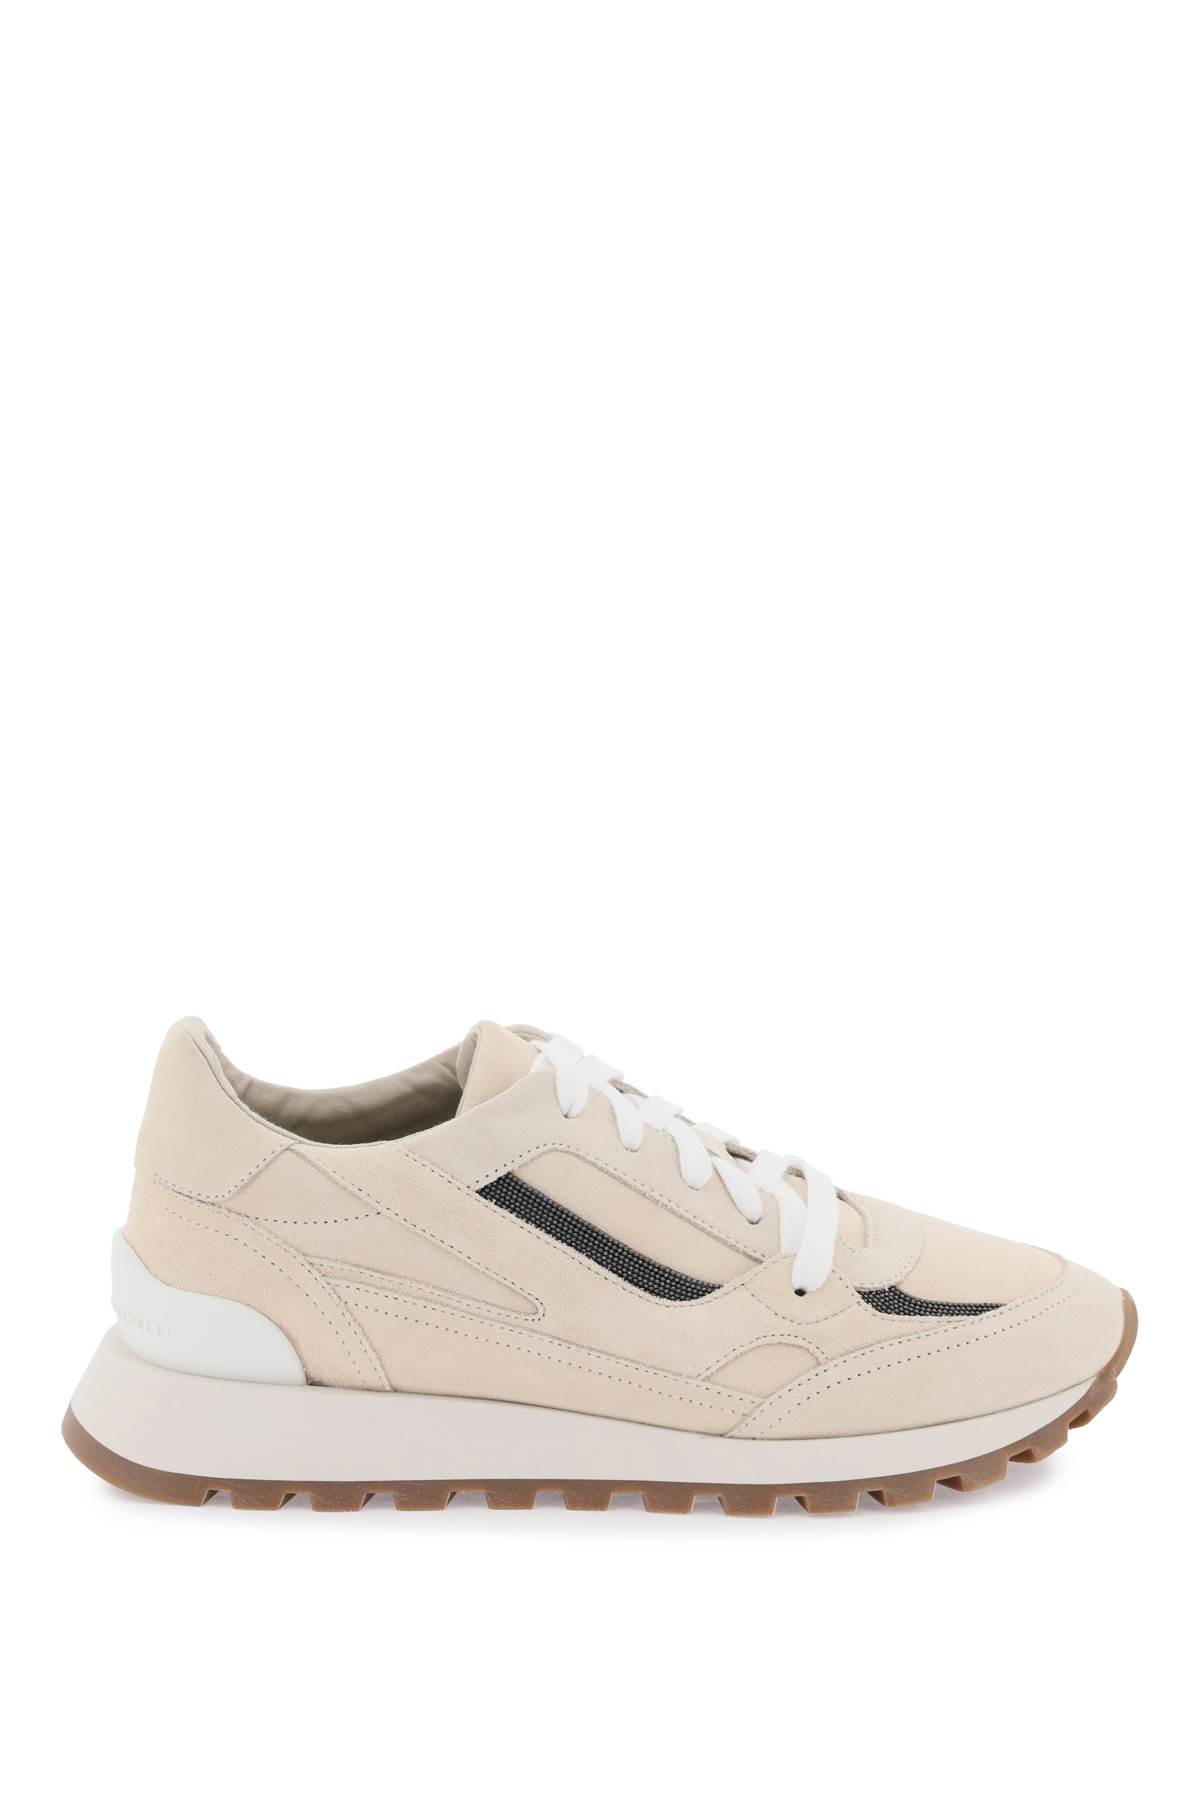 Shop Brunello Cucinelli Suede Sneakers With Monili Insets In Yellow Cream